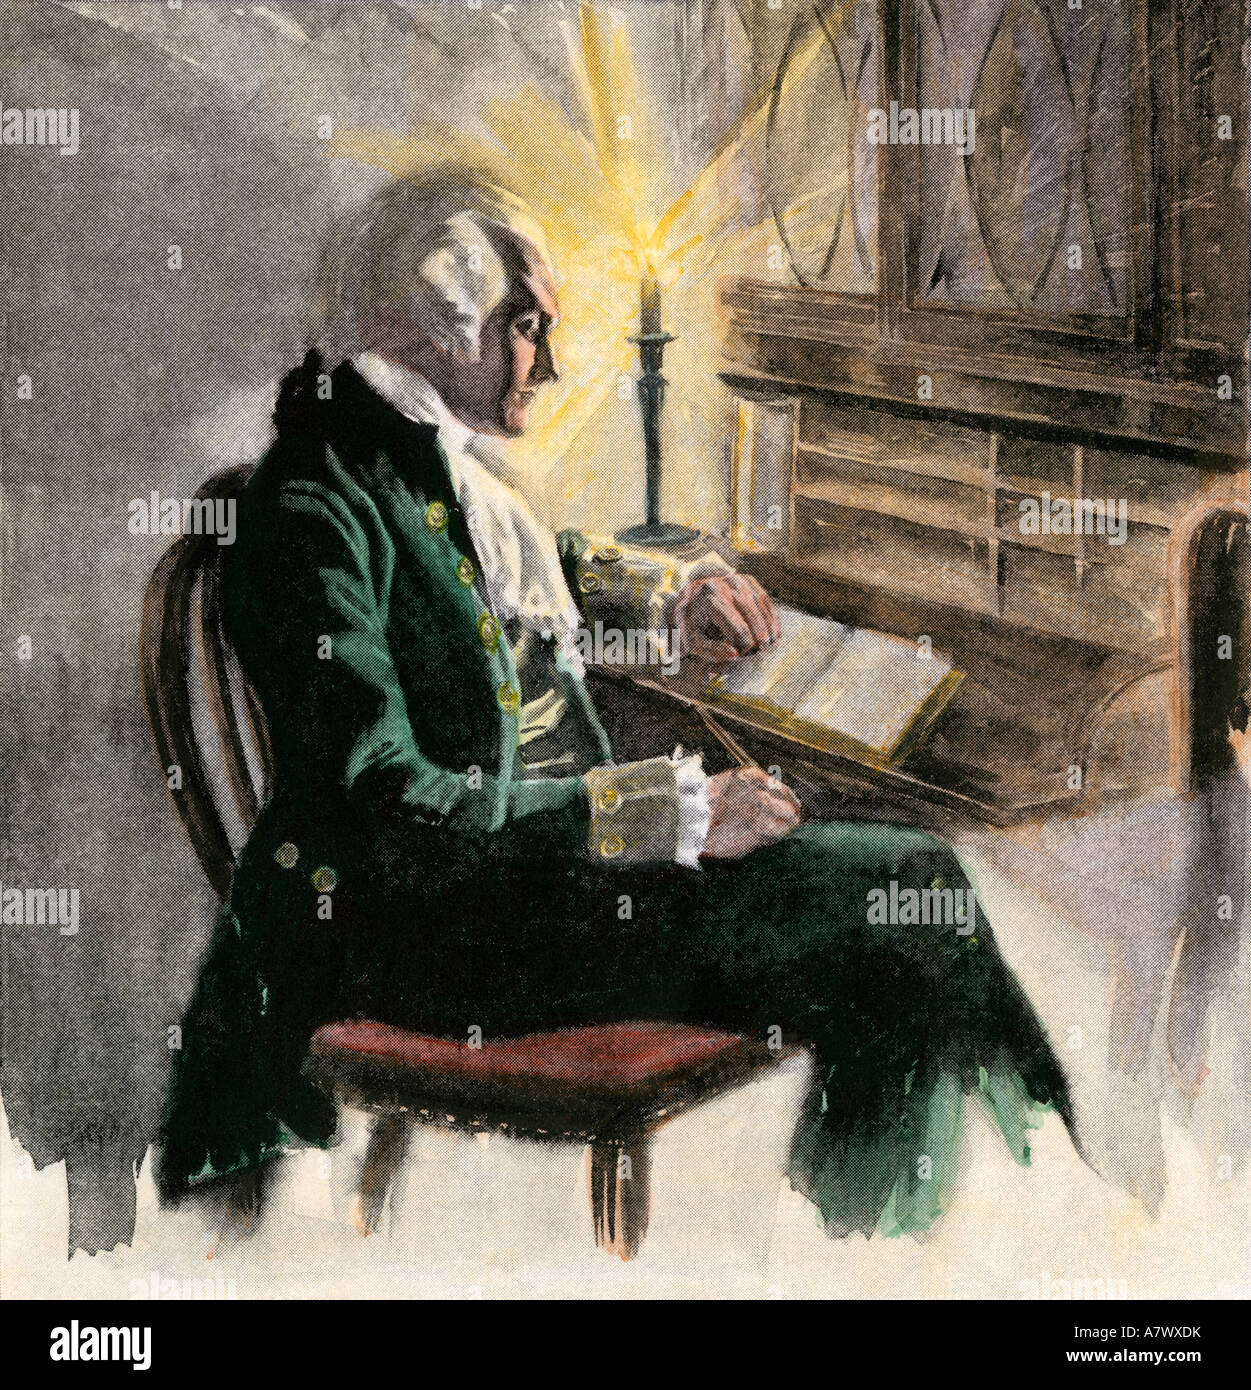 George Washington writing at his desk by candlelight. Hand-colored halftone of an illustration Stock Photo